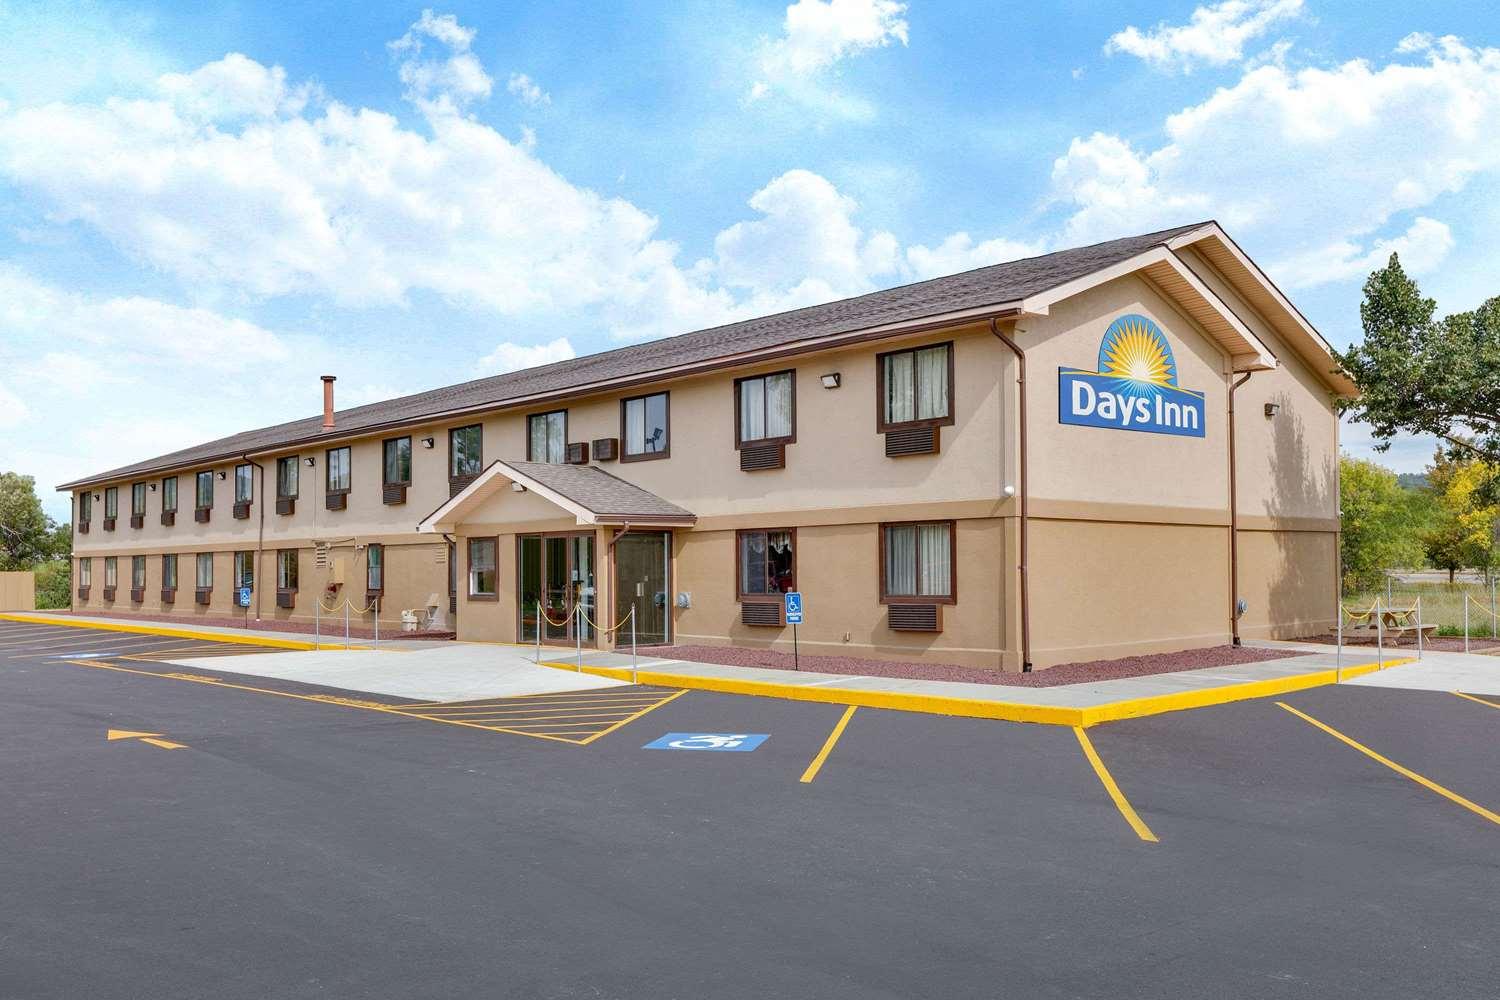 Days Inn by Wyndham Hornell NY in Hornell, NY